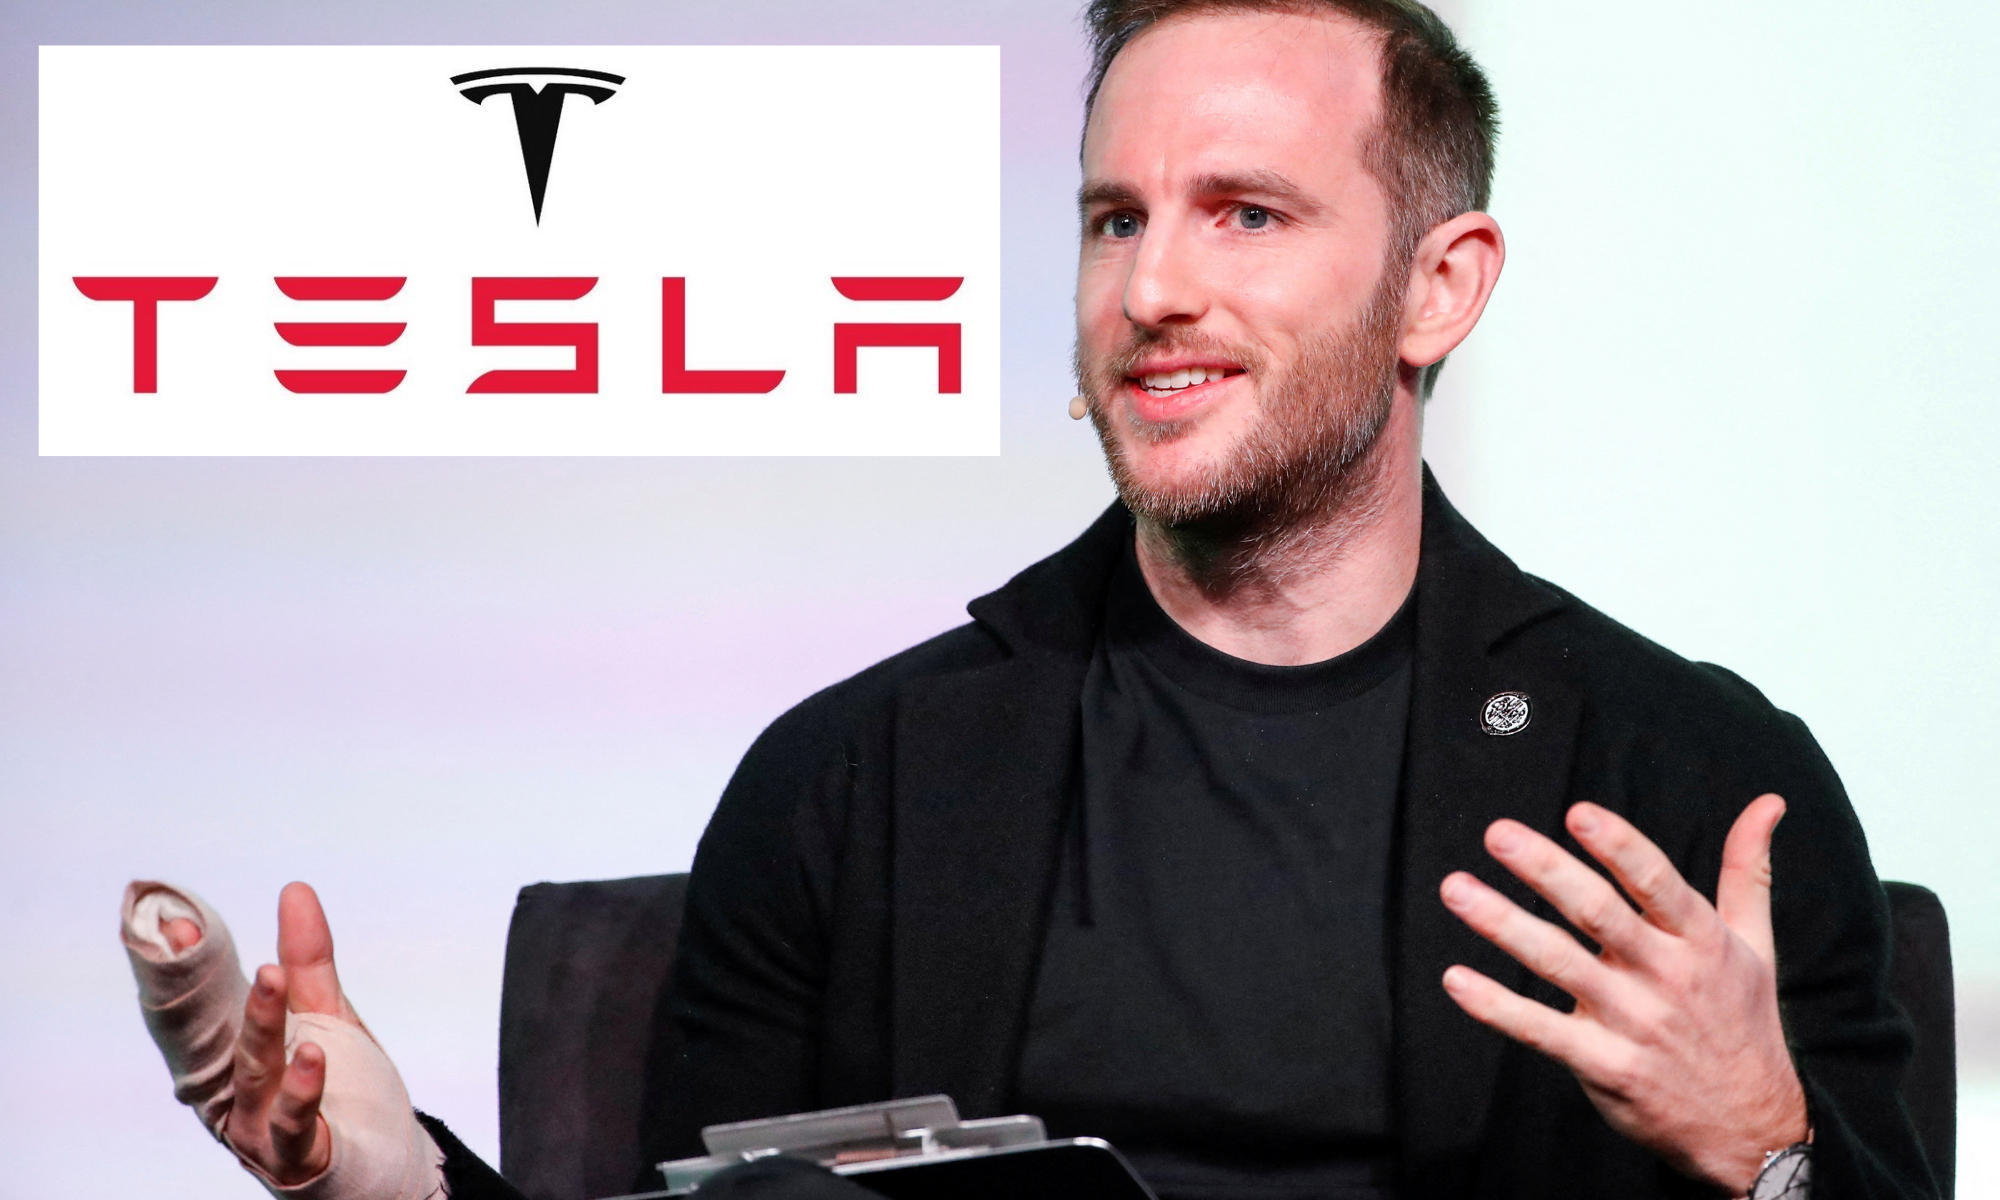 Joseph Gebbia, co-founder of Airbnb, added to the Tesla board_40.1